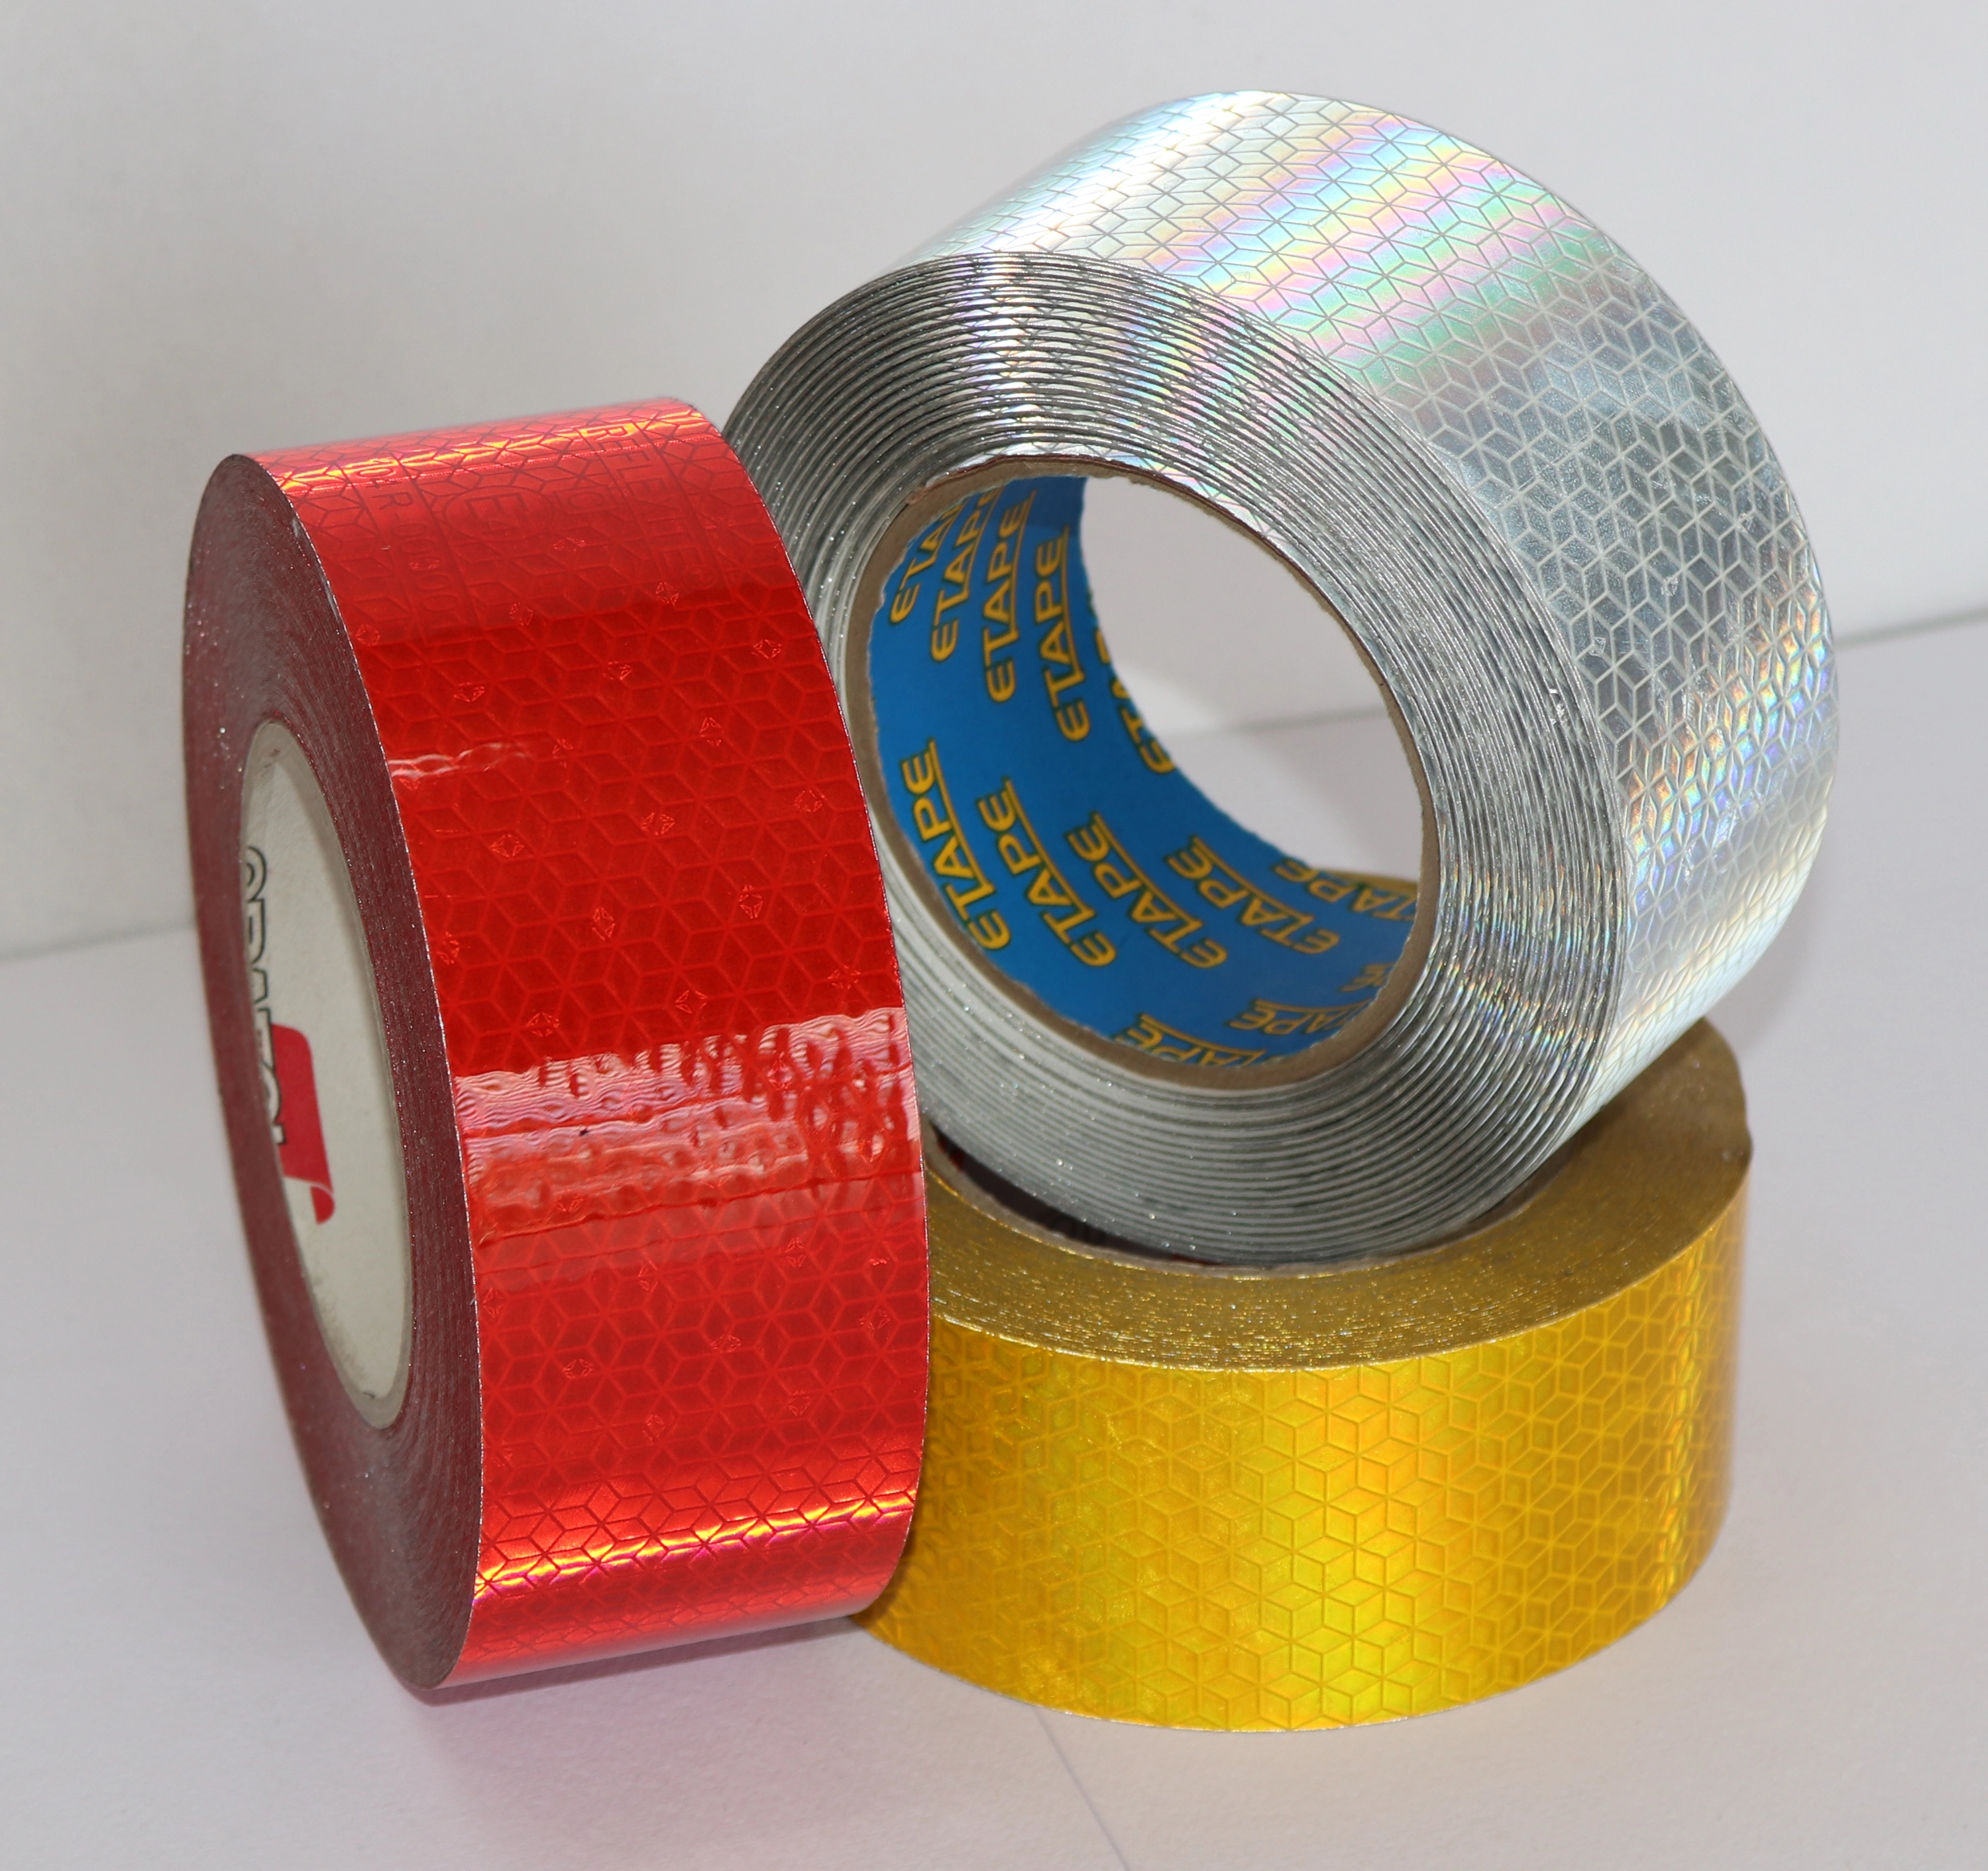 Reflective safety tape used for application onto trucks and trailers sold by Easitape